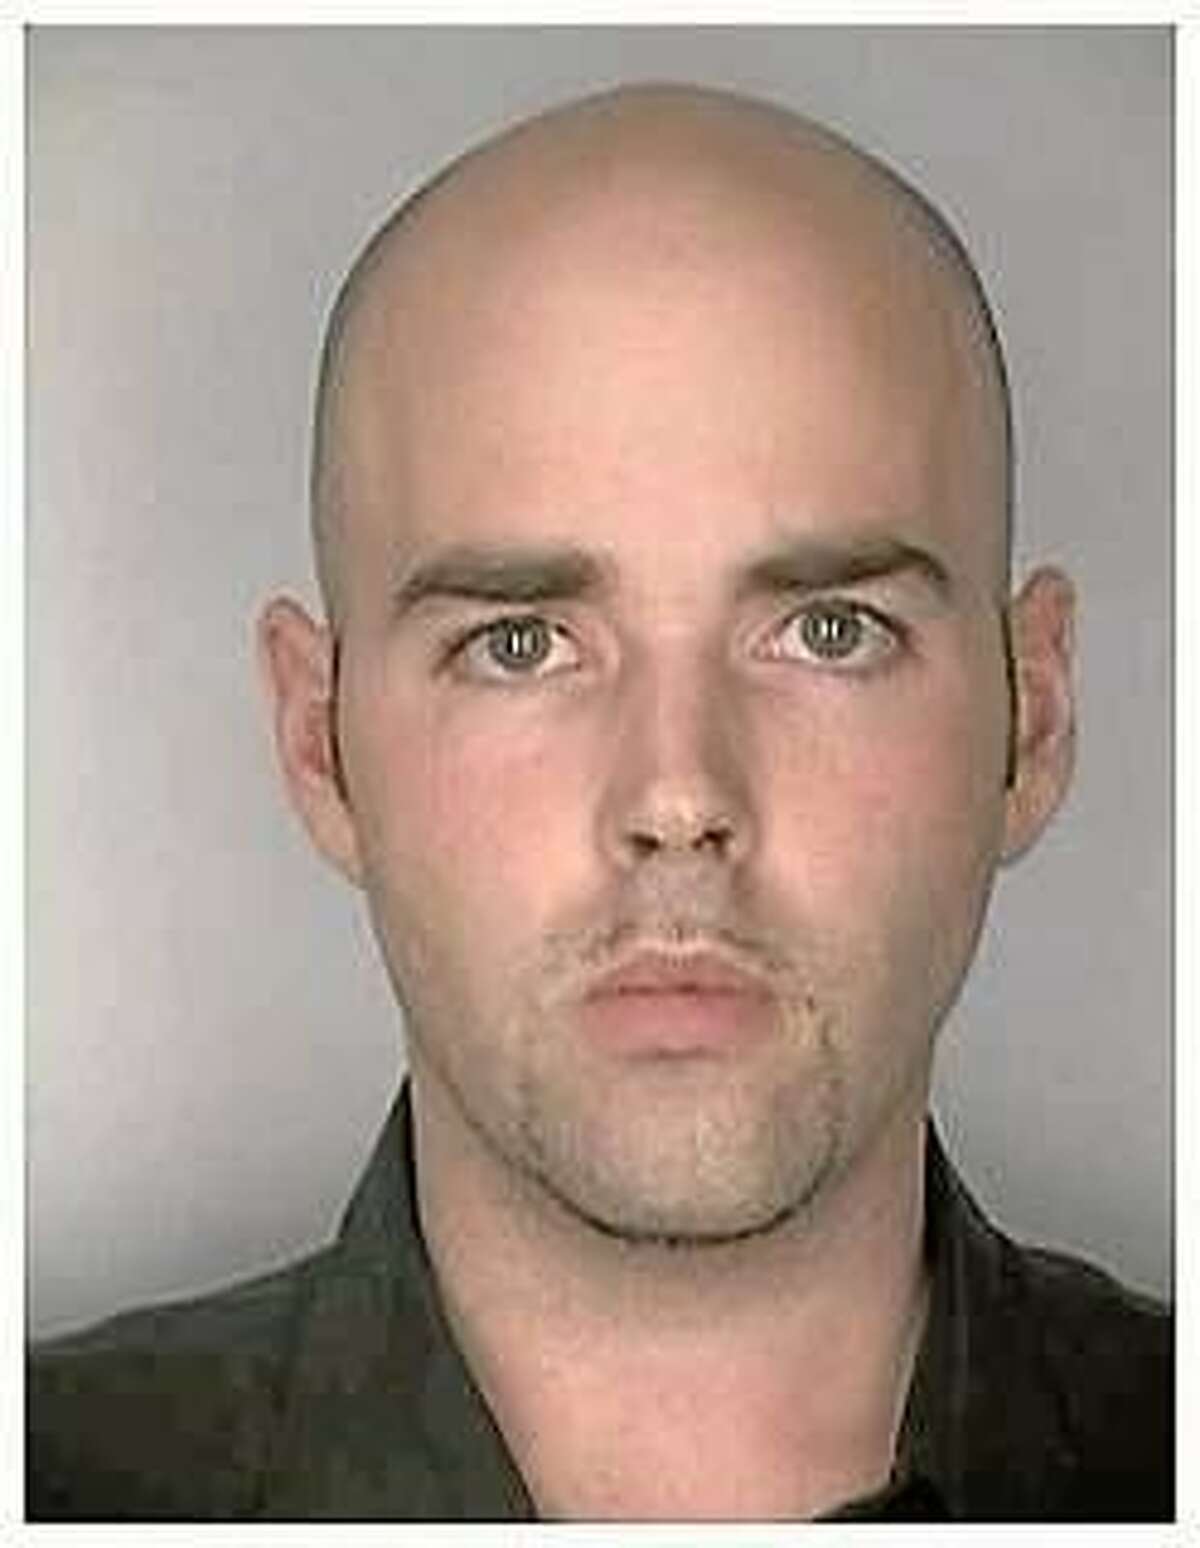 Pennsylvania man who pretended to be Newtown shooter's uncle violated